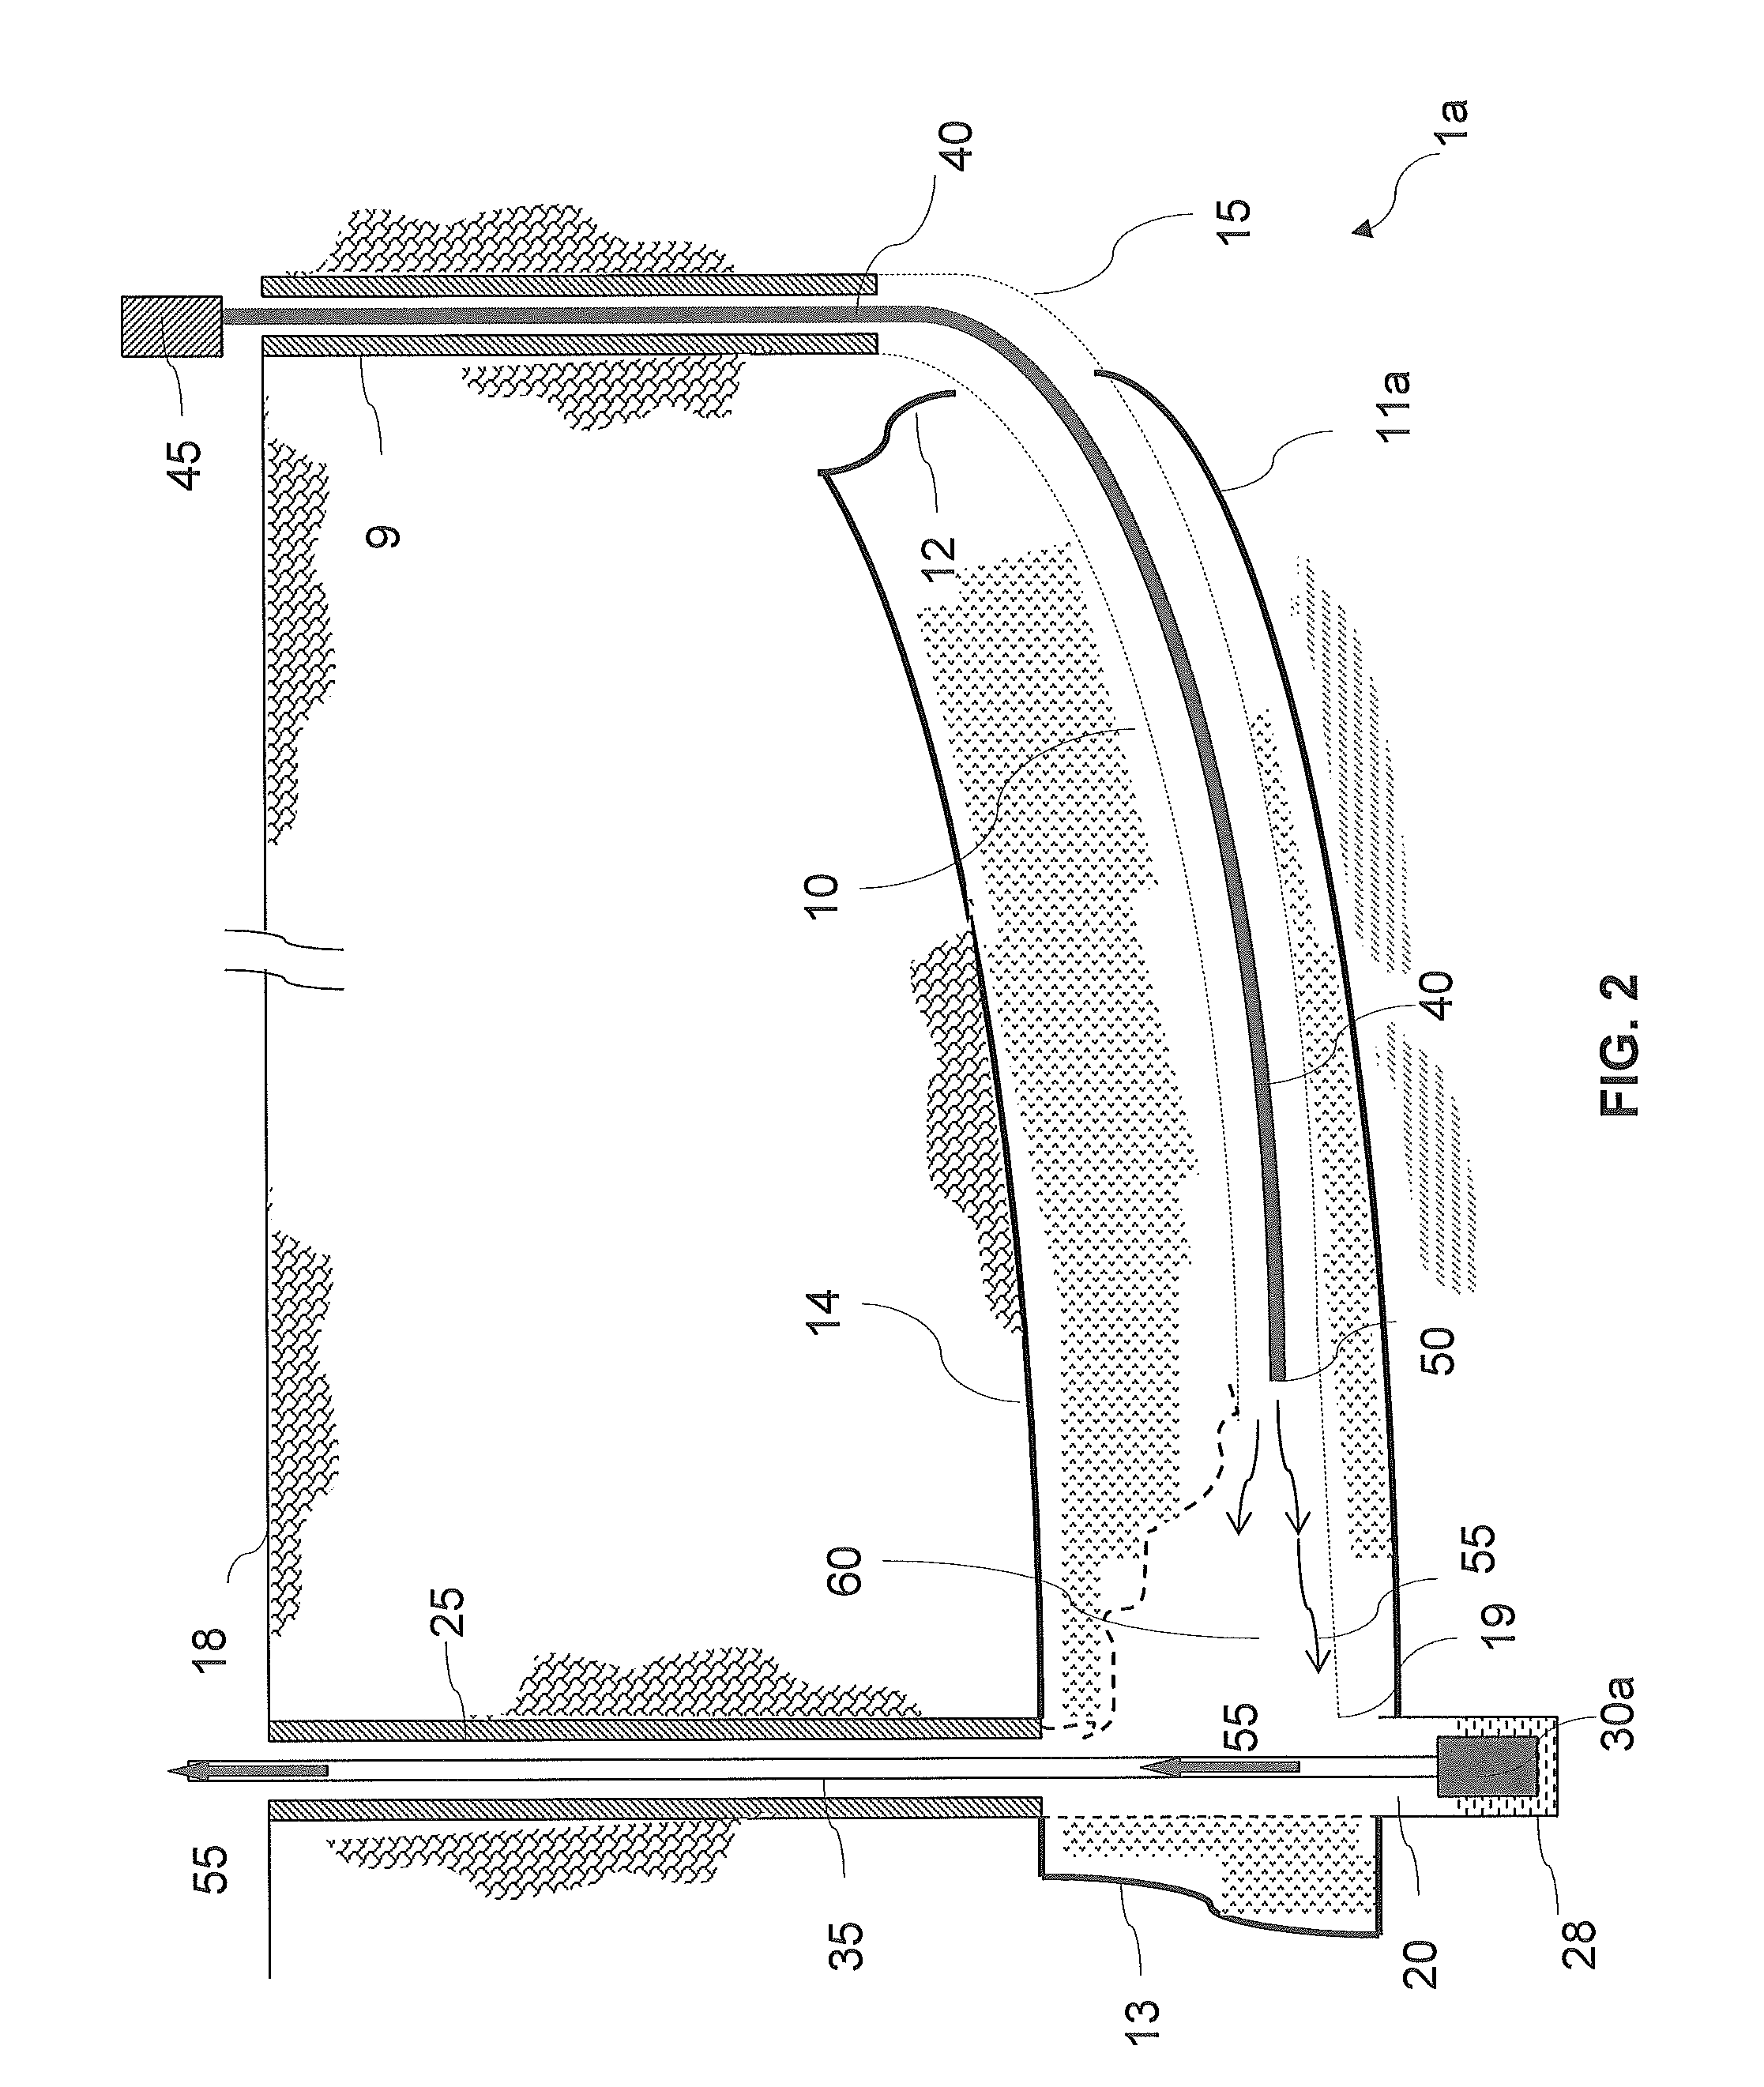 Traveling undercut solution mining systems and methods